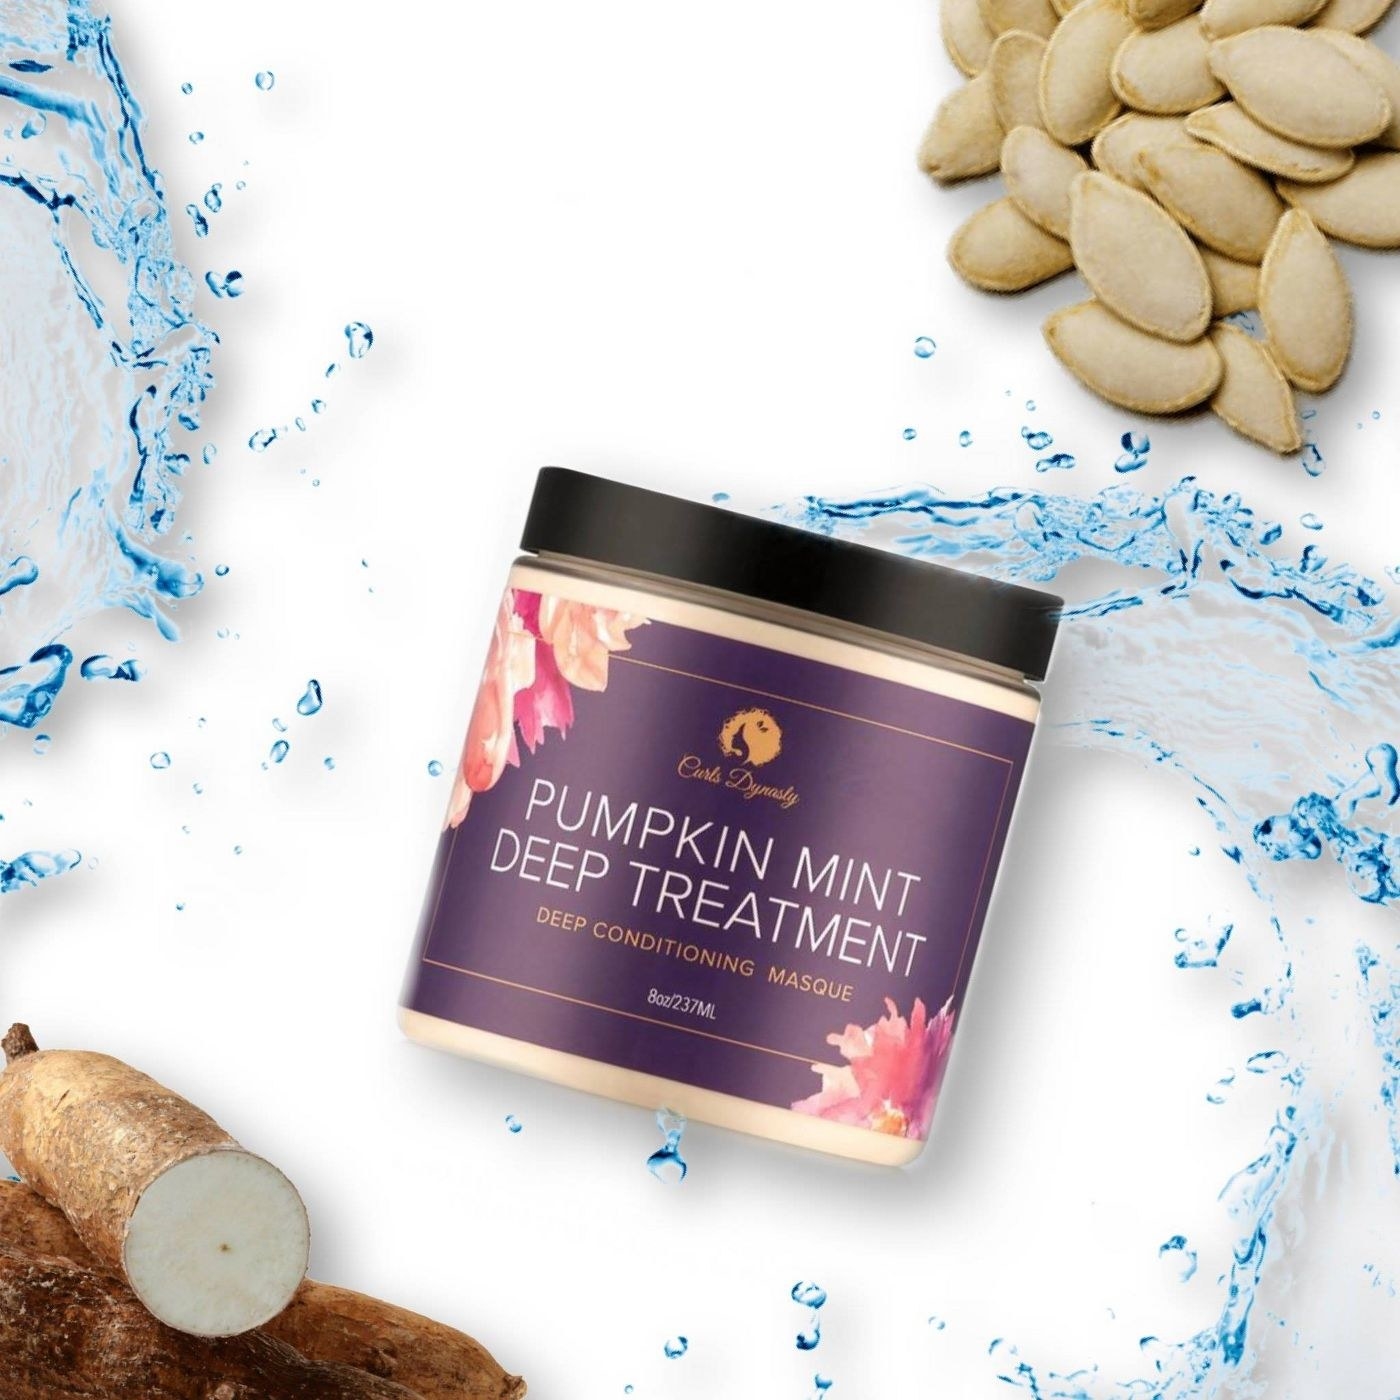 The deep conditioning masque